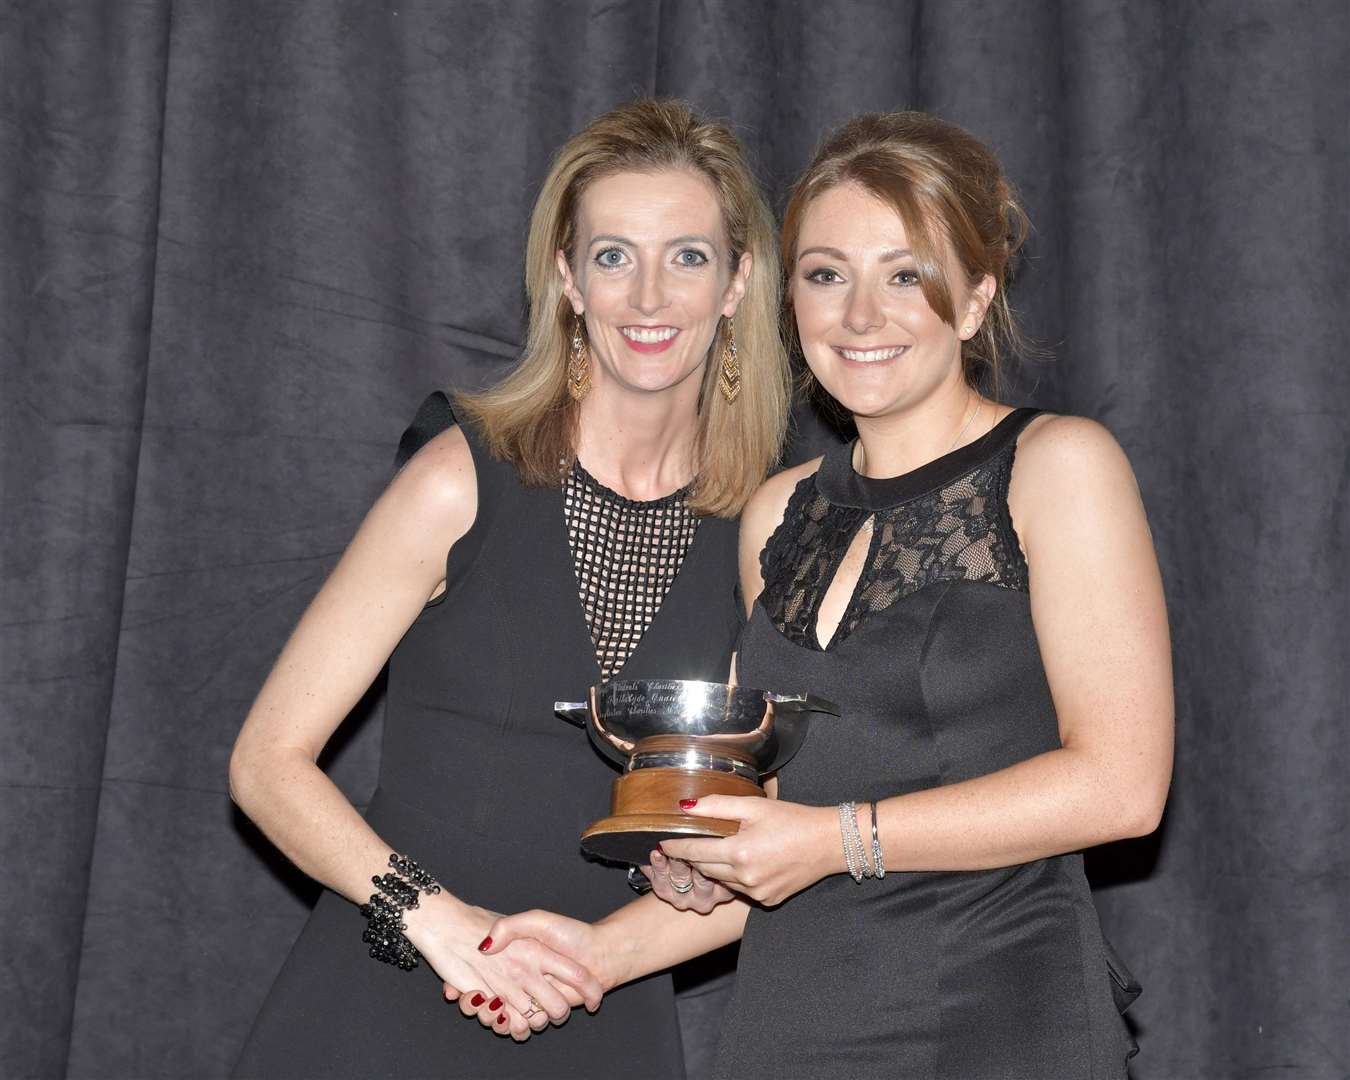 Ashleigh (right) receives the Scottish Lady Driver of the Year award from Jillian Shedden. Photo: Jim Moir